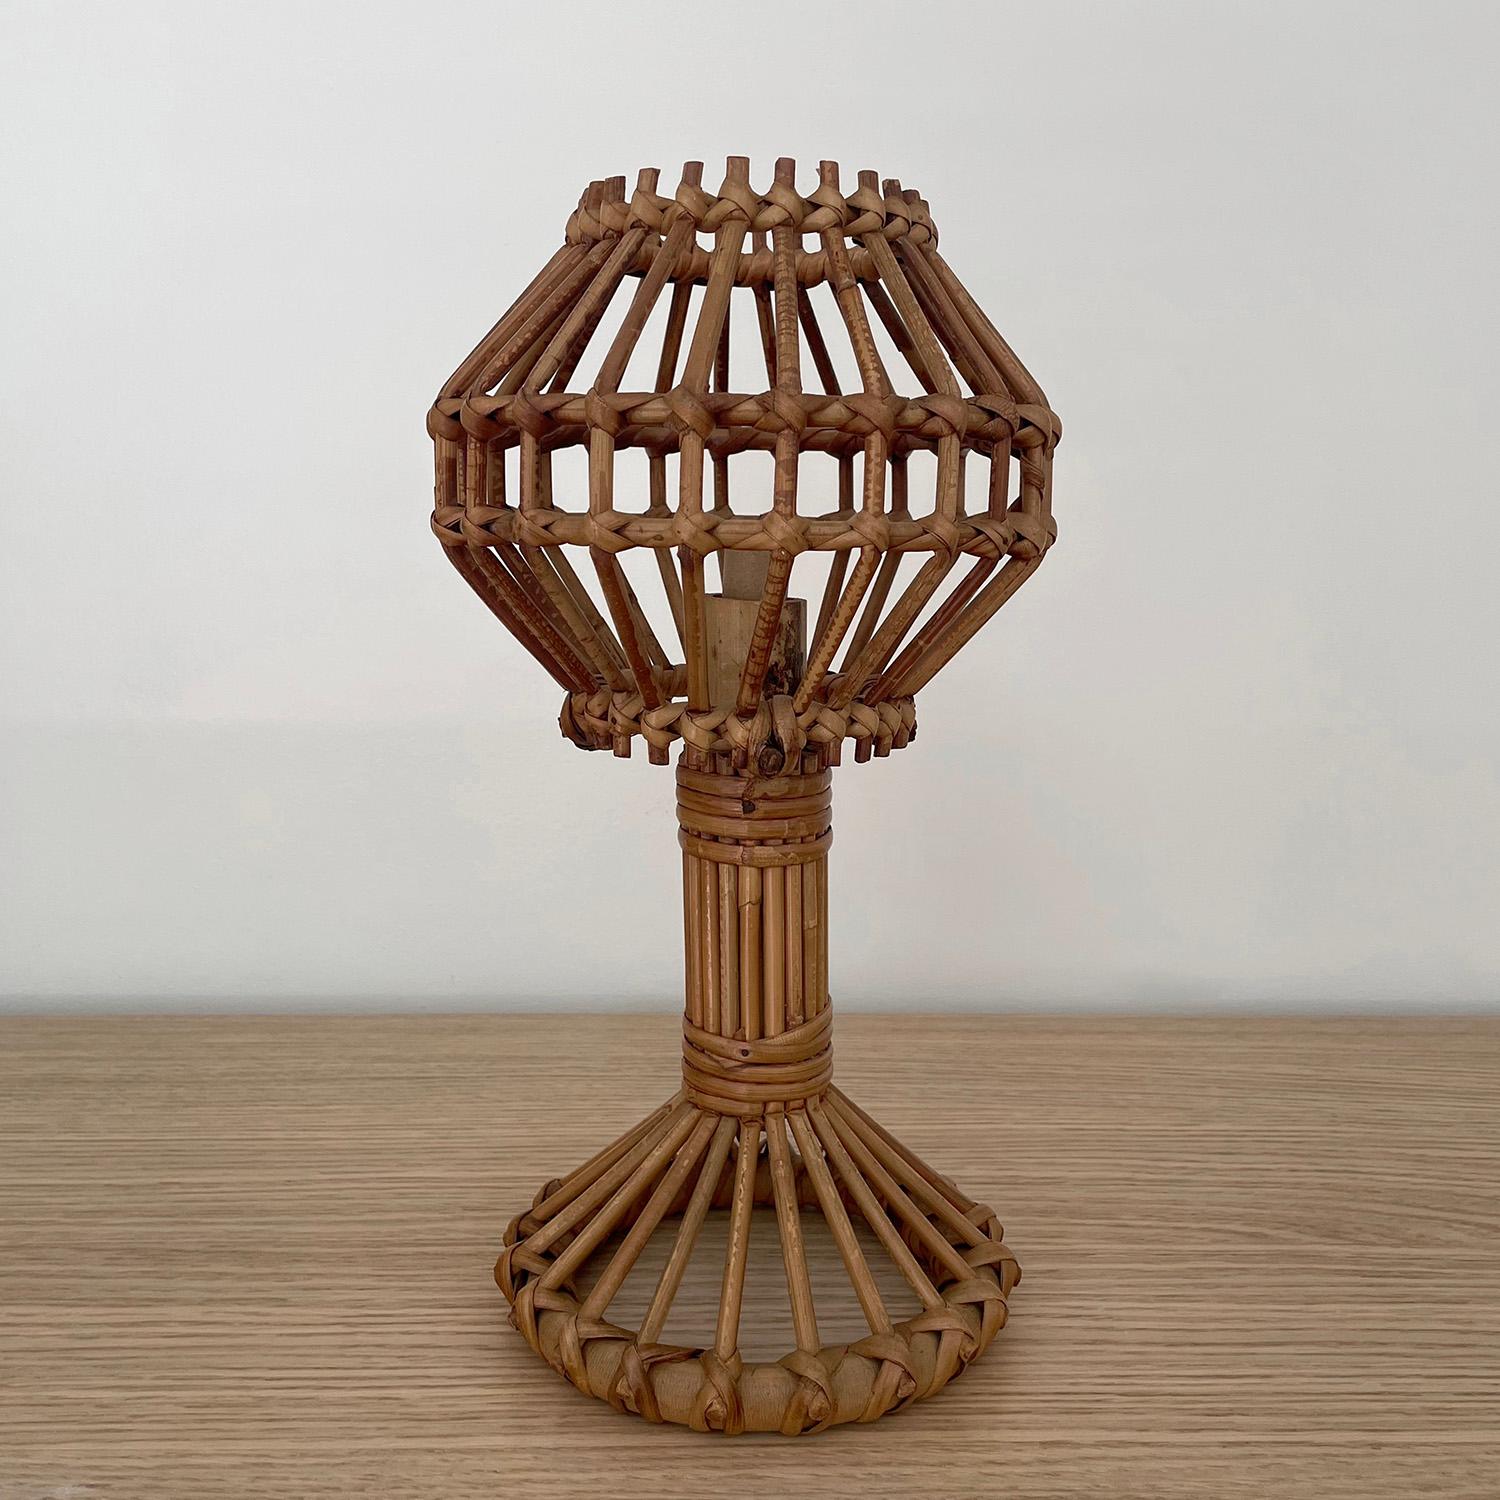 French rattan infinity lamp 
Beautifully sculpted rattan 
Natural color variations 
Illuminates light beautifully 
Newly rewired 
Silk french twist cord 
Single socket candelabra base
Last photo is for reference only 
Please see other listings 